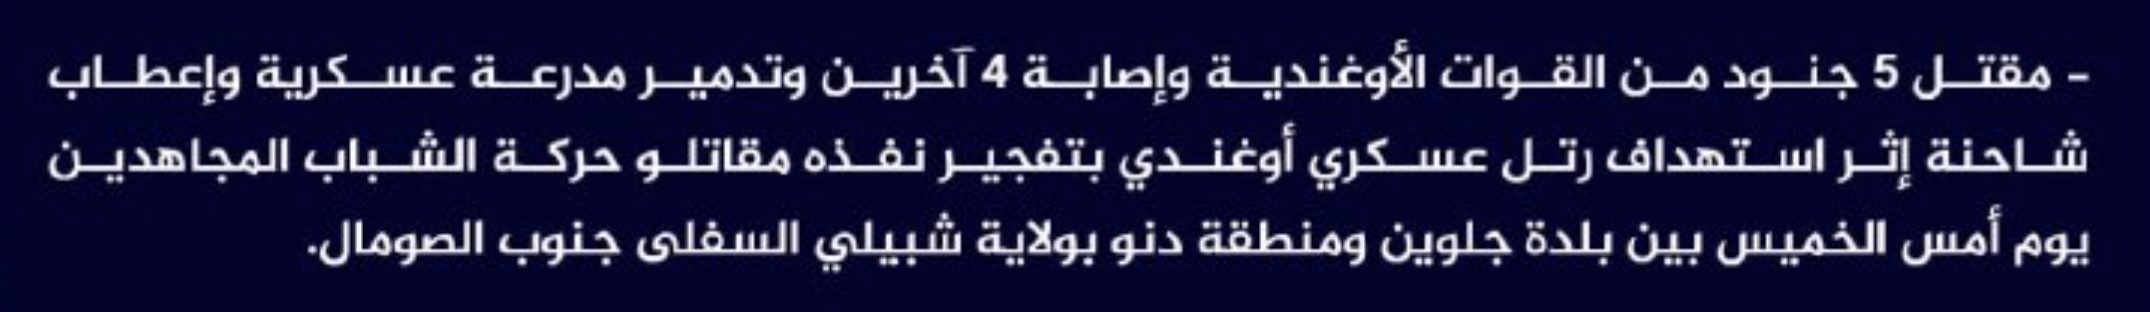 (Claim) al-Shabaab Killed 5 Ugandan Soldiers, Injured 4 Others and Destroyed a Military Tank and a Vehicle in an IED Attack on an Ugandan Forces Convoy in Golweyn Town and Danu District, Lower Shabelle, Southern Somalia - 15 September 2023